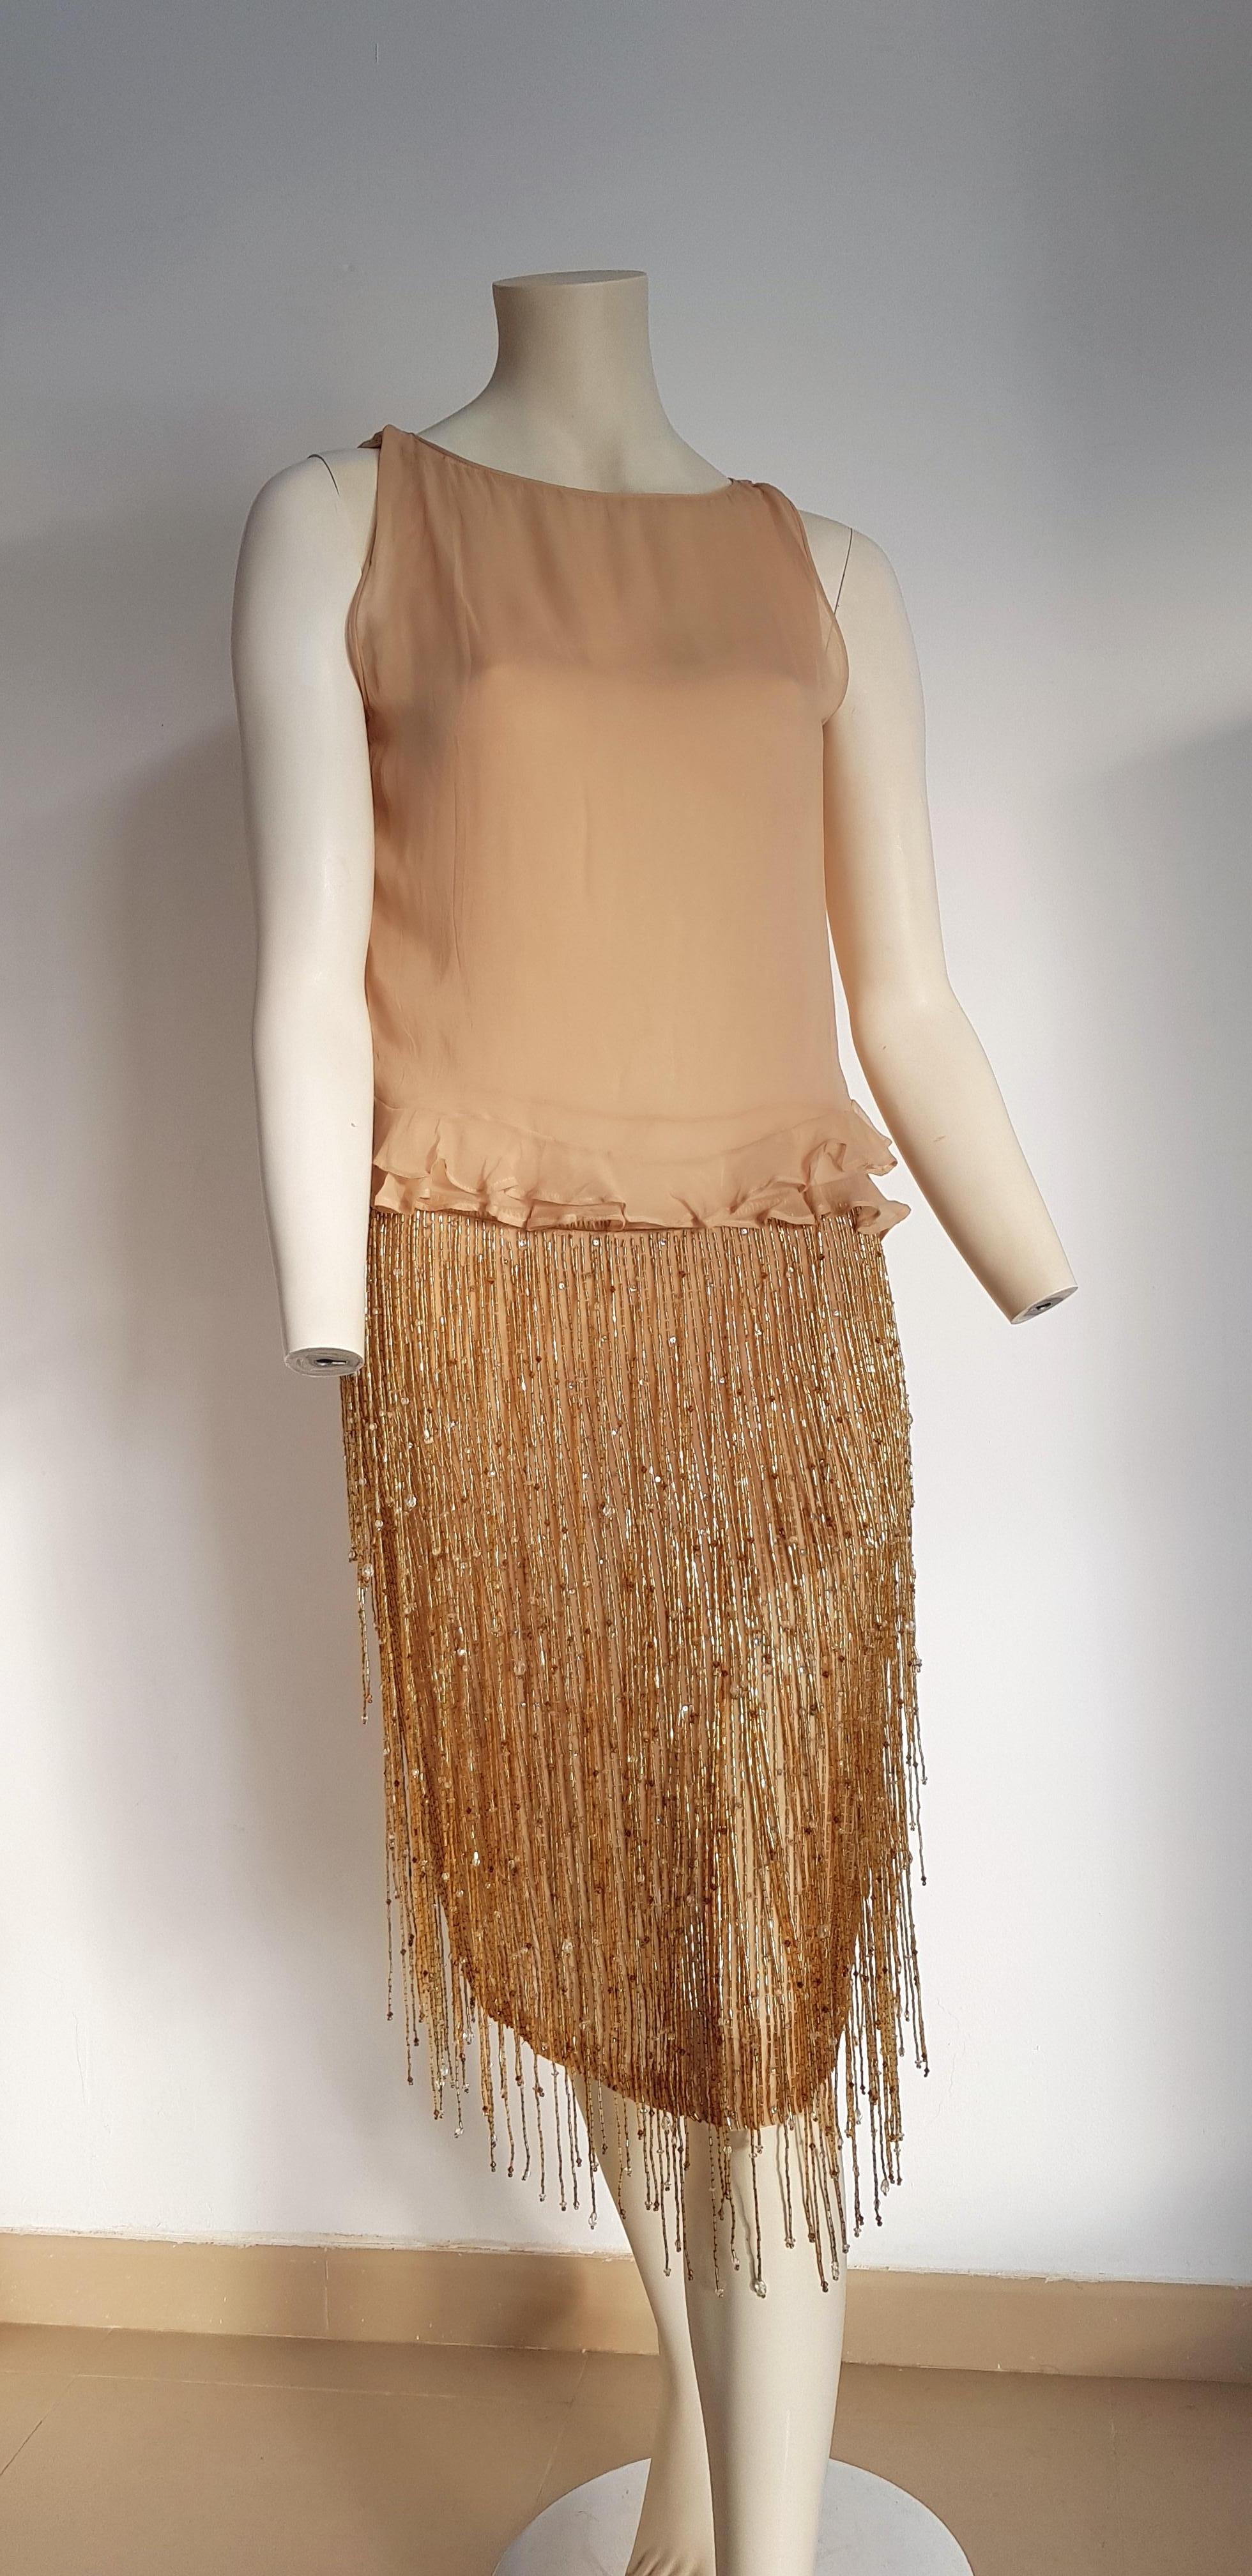 GUCCI Haute Couture Swarovski Diamonds Beaded Silk Top Skirt  - Unworn, New with tags.

SIZE: equivalent to about S/M, please review approx measurements as follows in cm. 
TOP: lenght 50, chest underarm to underarm 45, bust circumference 86,